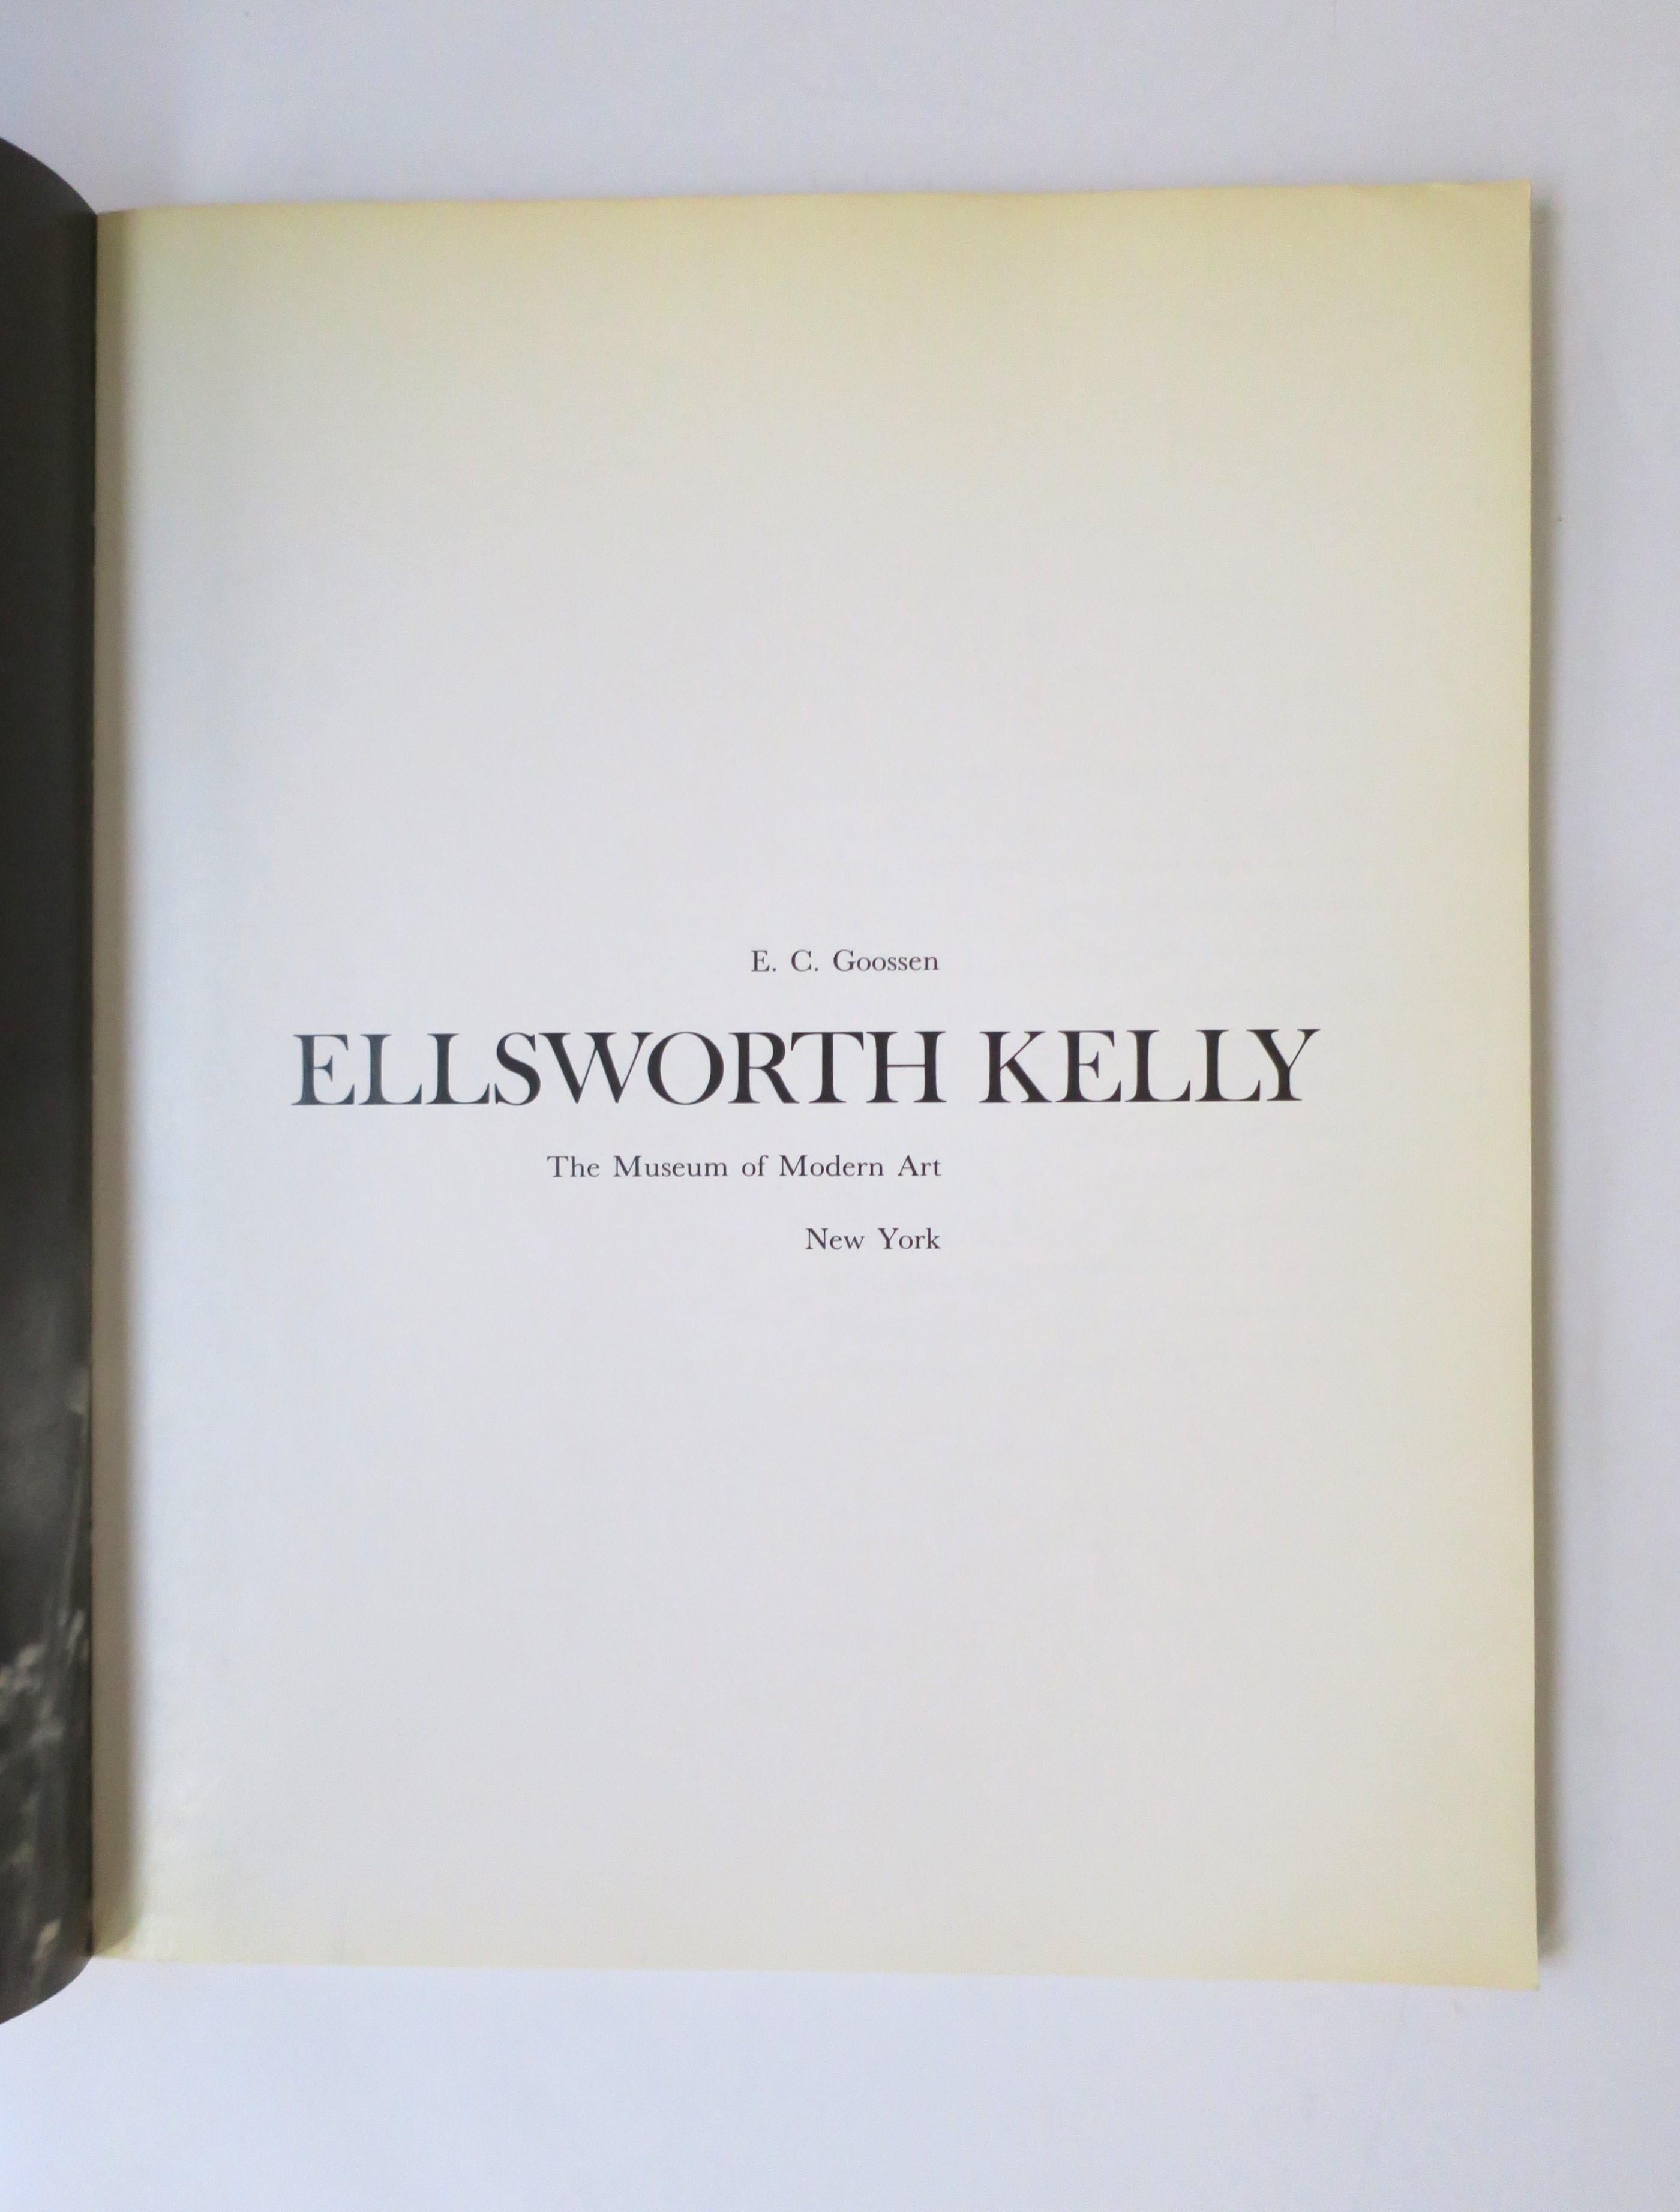 Paper Ellsworth Kelly Exhibition Catalog Book New York, 1973 For Sale